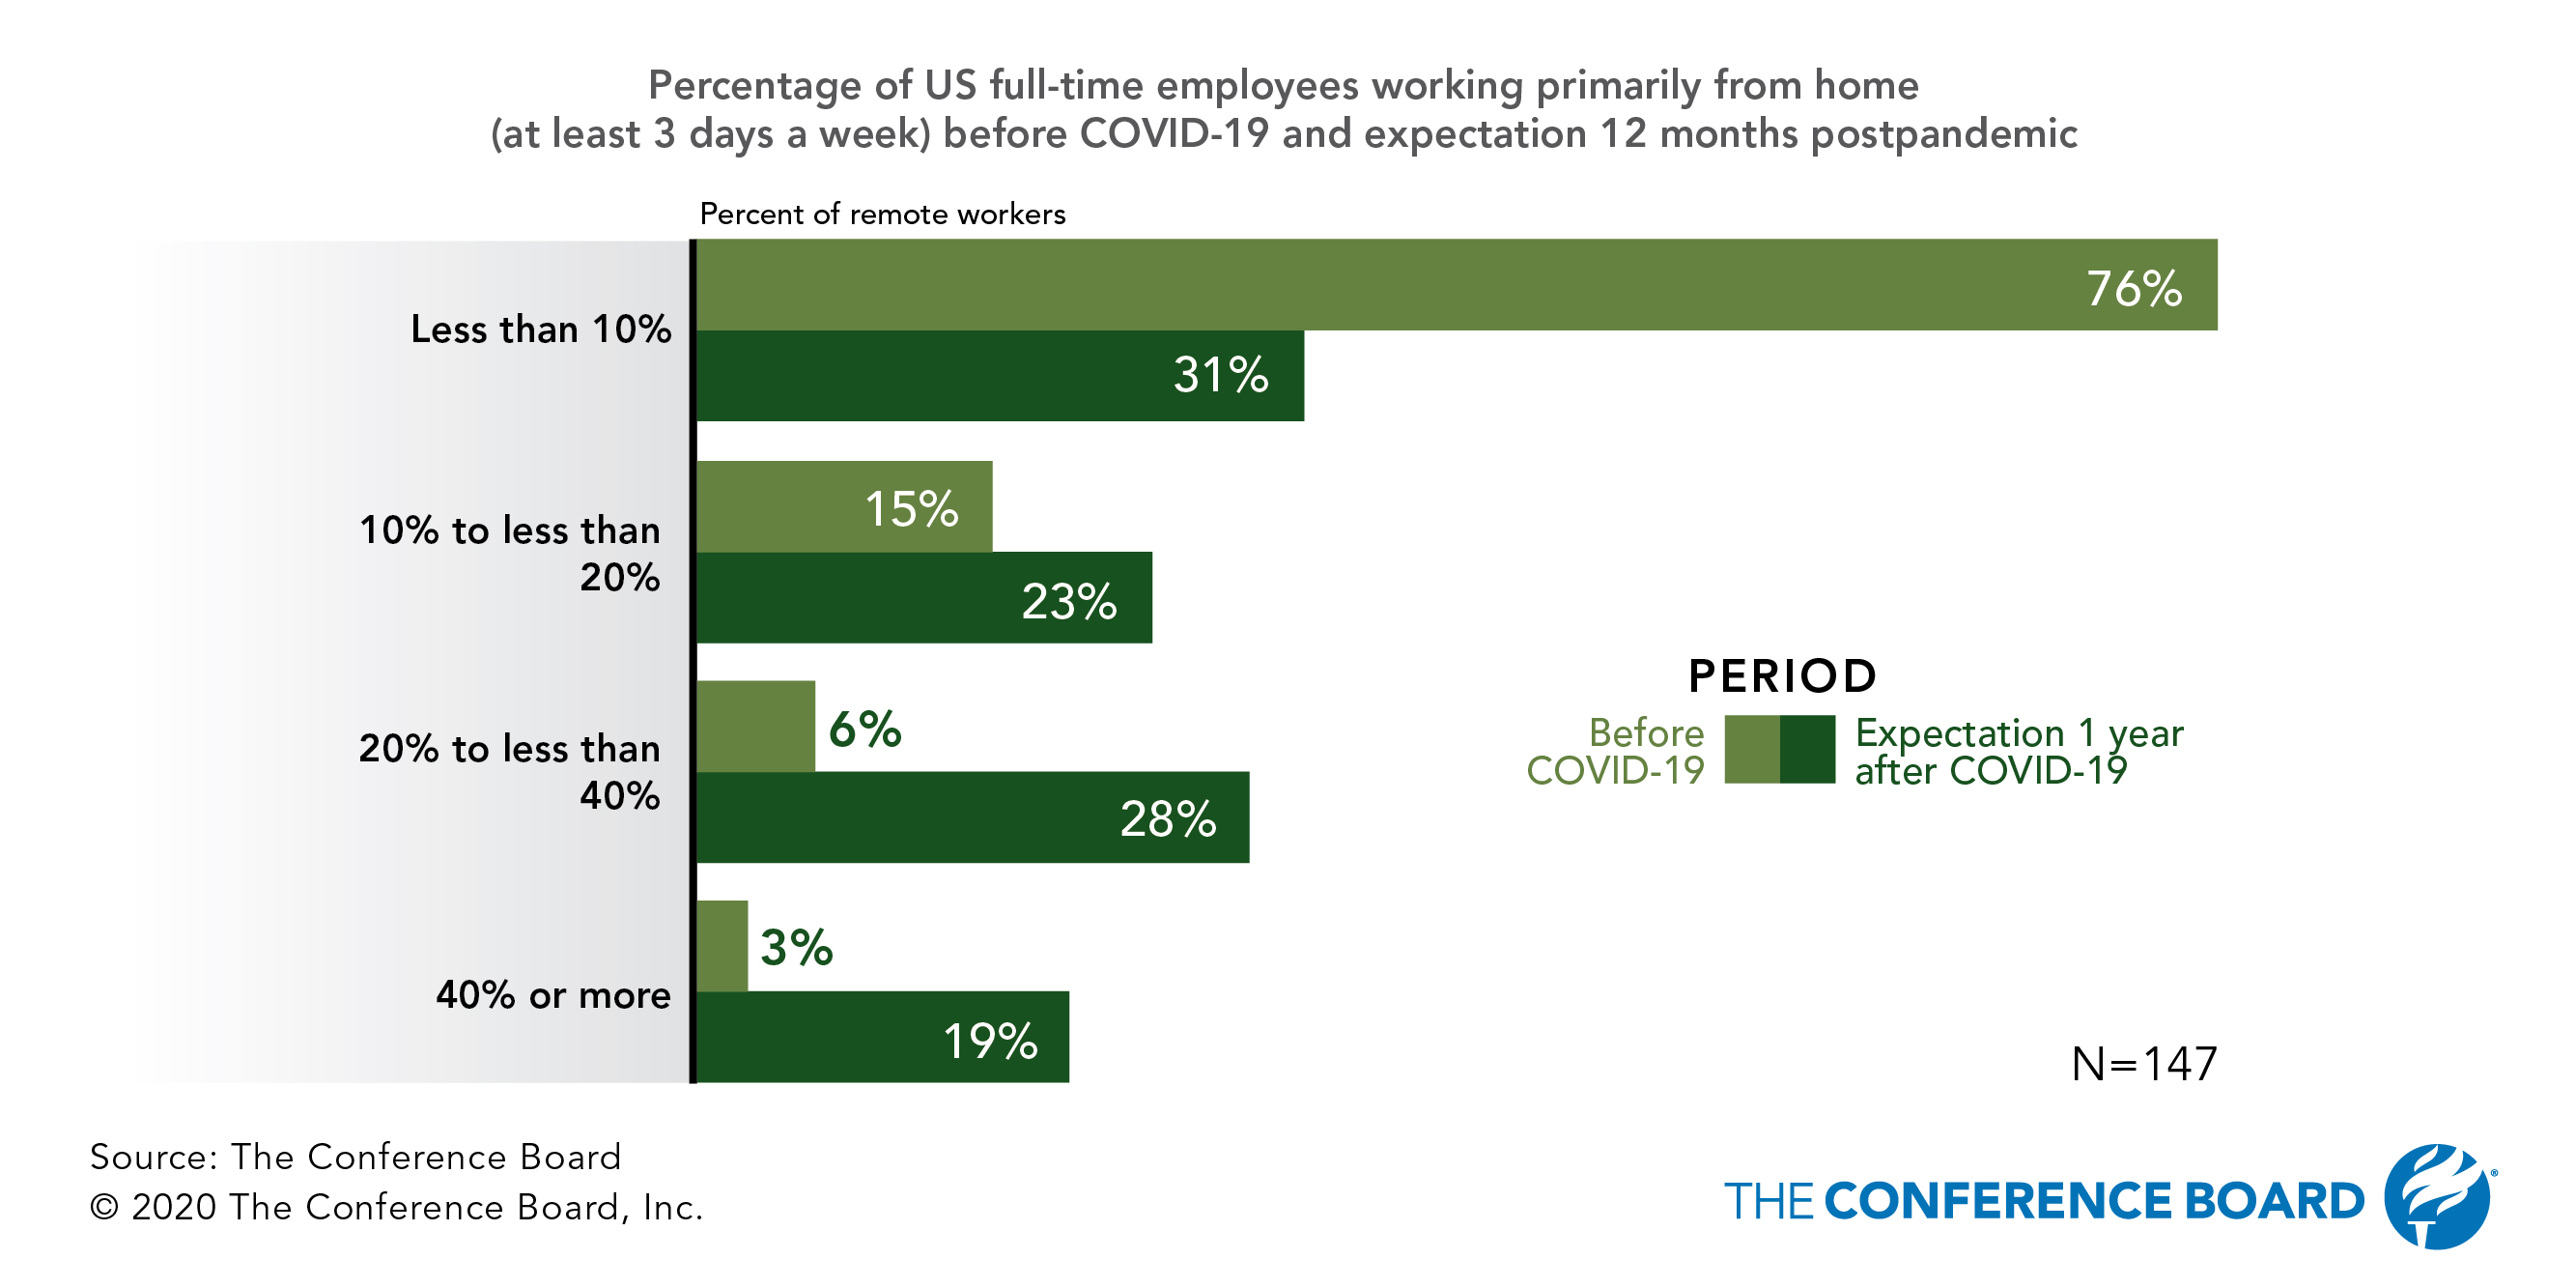 While three-quarters of respondents reported that less than 10% of employees worked primarily from home before COVID-19, this trend will likely reverse after COVID-19